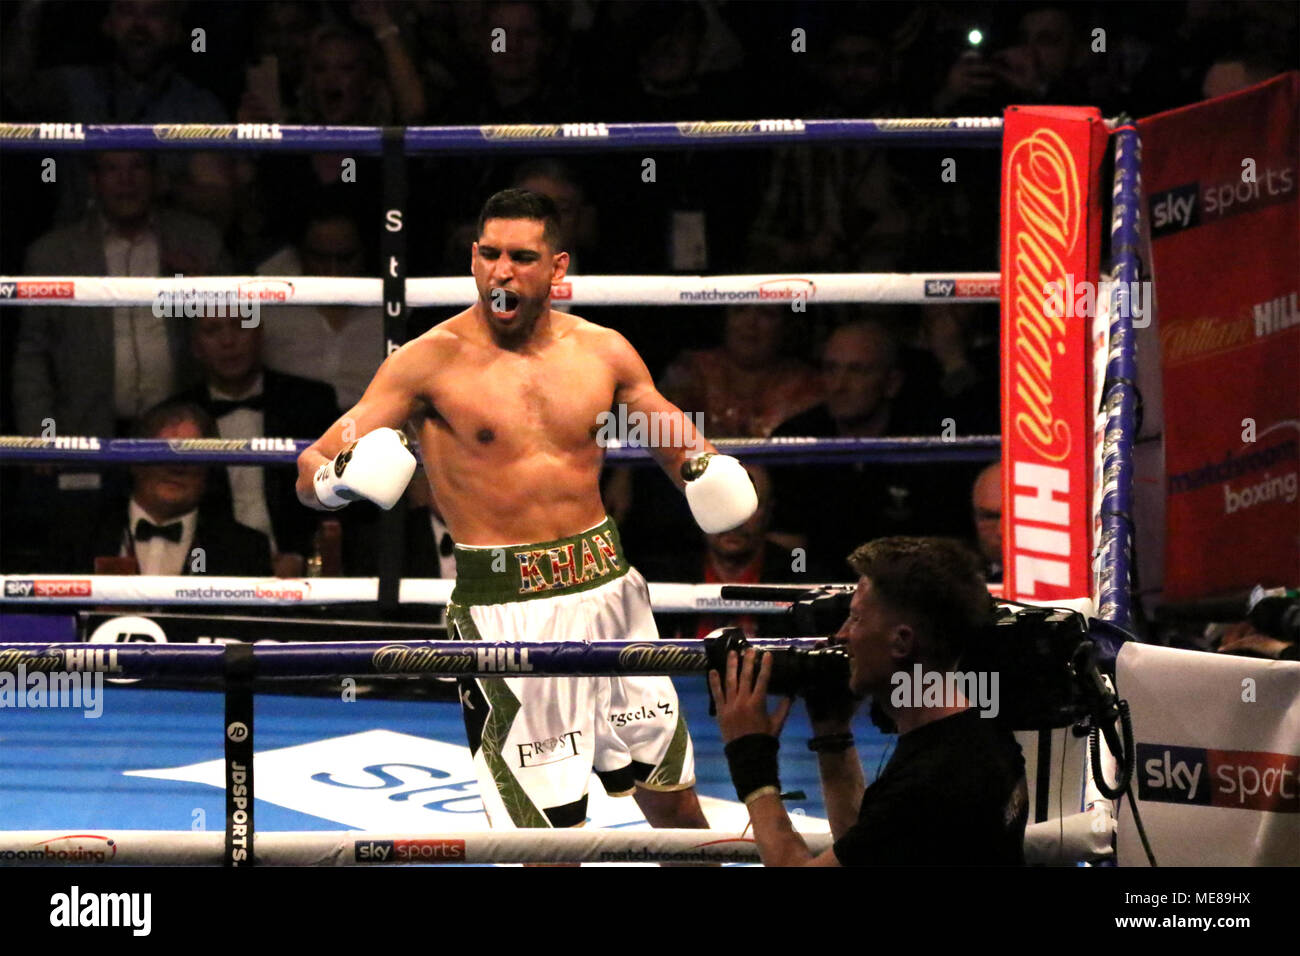 Liverpool, UK, 21 April 2018. Amir Khan fights Phil Lo Greco at the Echo Arena in Liverpool.  Saturday April-21-2018.  Amir Khan is victorious at the much anticipated comeback fight against Canadian boxer Phil Lo Greco the Echo Arena, Liverpool  The 31-year-old British boxer had his homecoming fight against Lo Greco in Liverpool this Saturday night, and victory could line up a big domestic battle with Kell Brook.   Credit: Cernan Elias/Alamy Live News Stock Photo